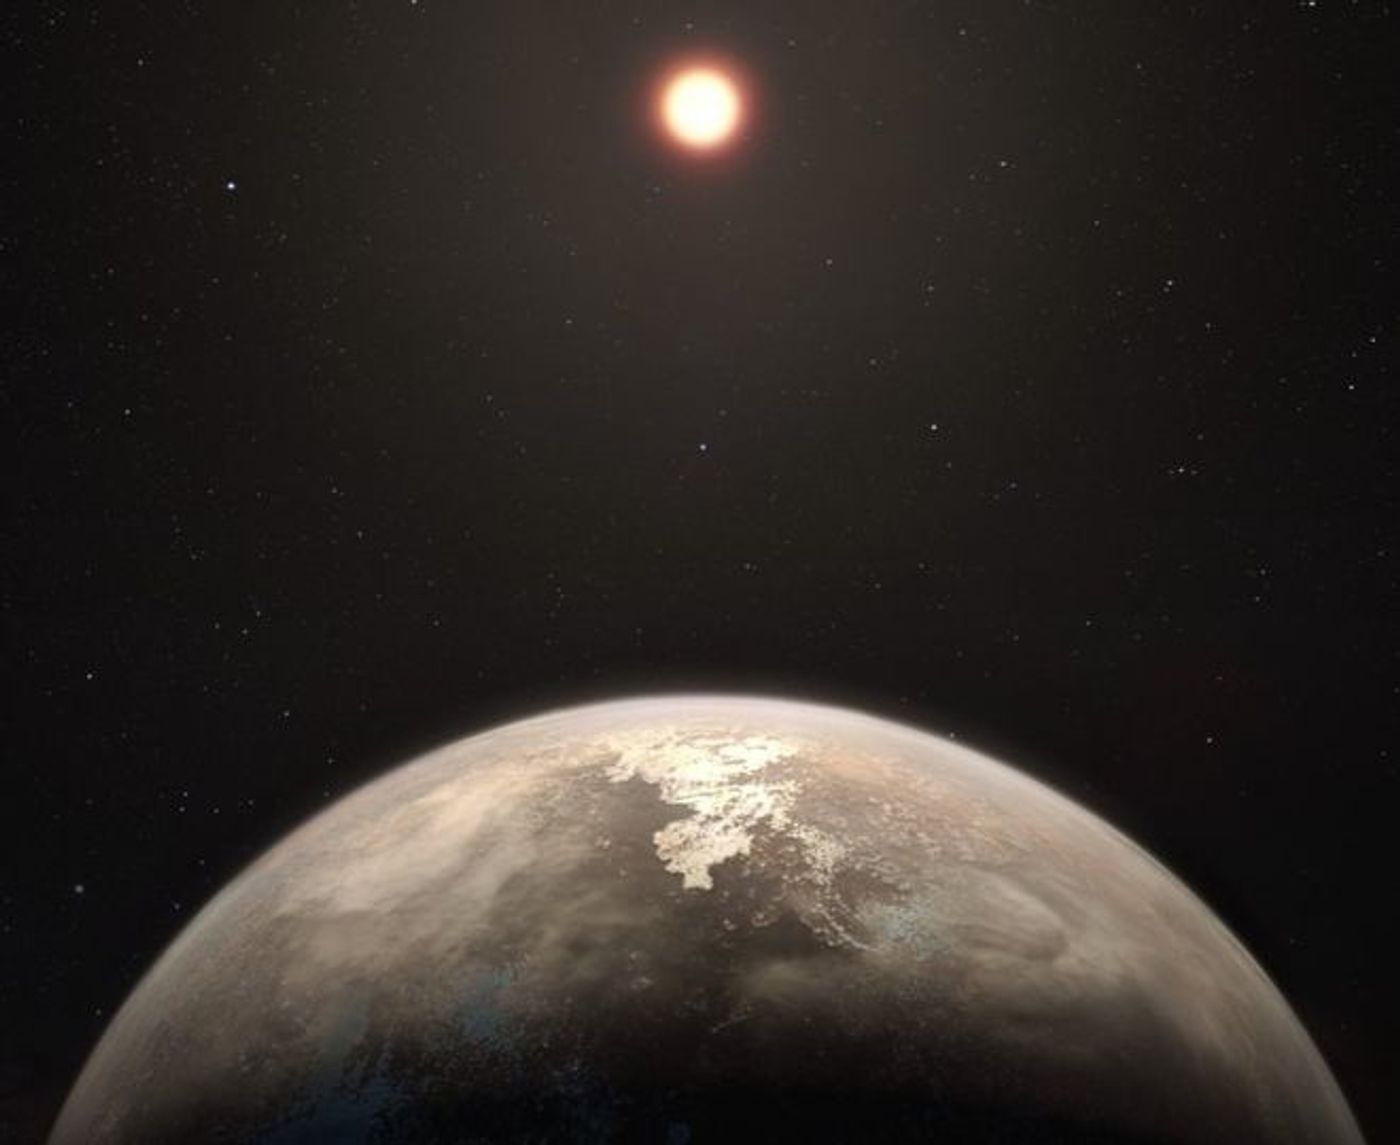 An artist's impression of Ross 128 b and its host star, a red dwarf called Ross 128.